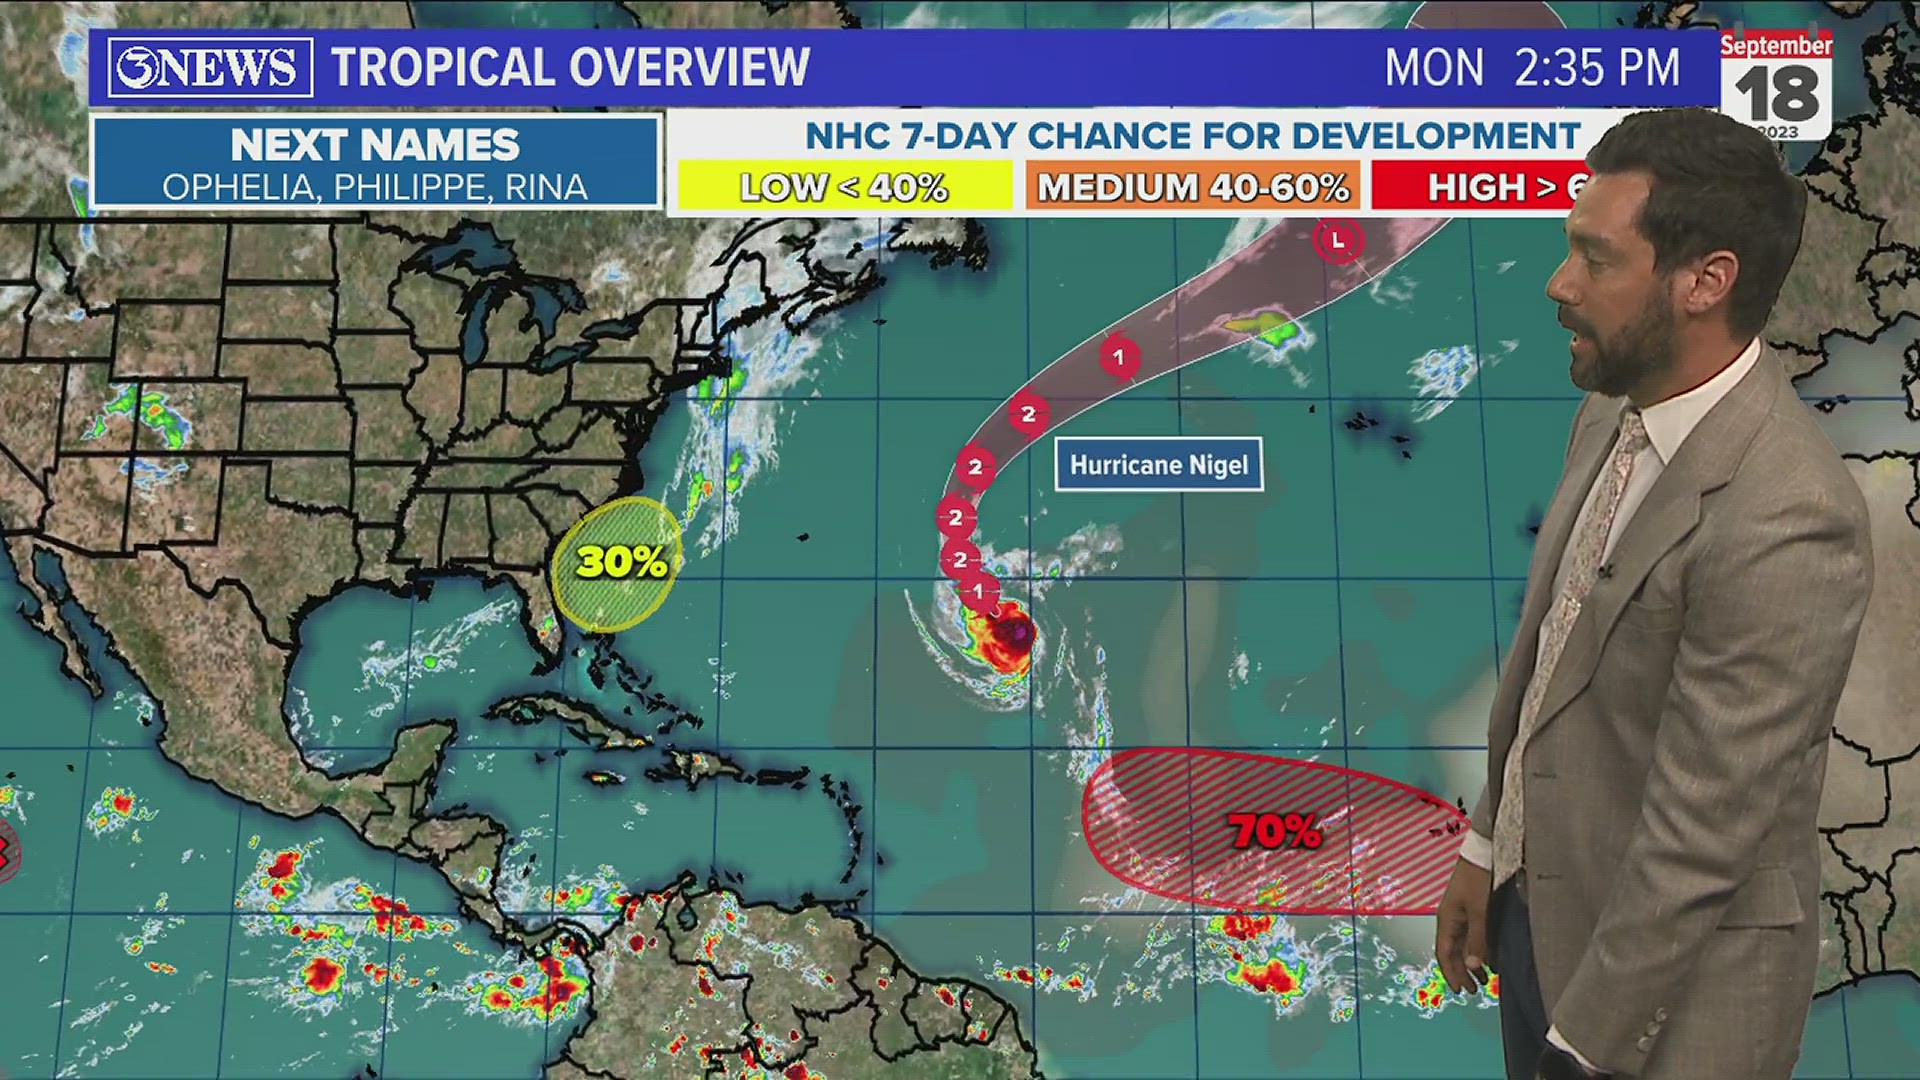 The Atlantic remains active, while the Gulf of Mexico looks quiet for the next week.